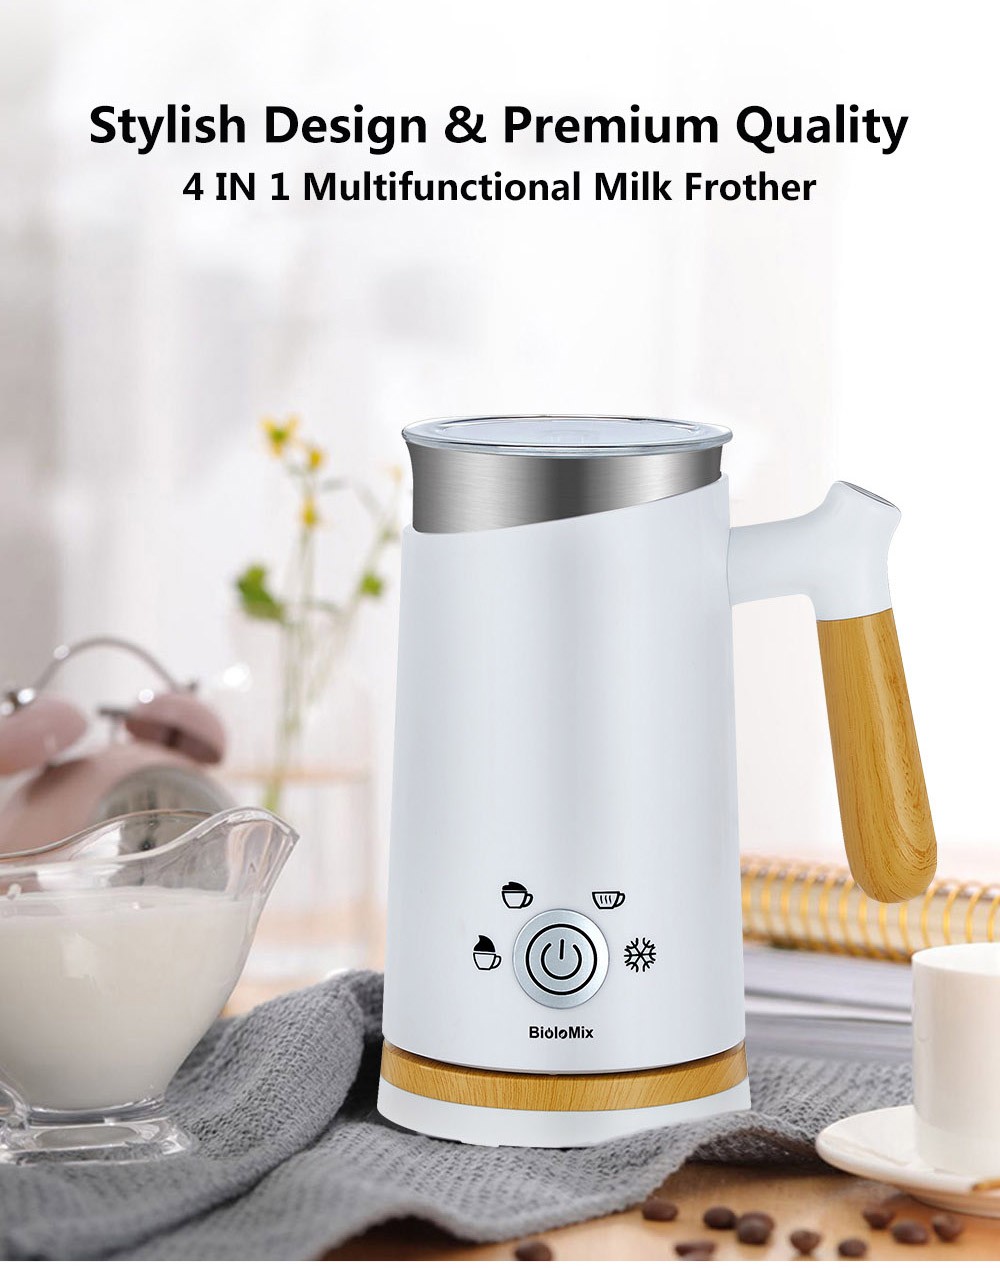 BioloMix BN11 4 in 1 Hot and Cold Milk Frother, 150ml Froening Capacity, 300ml Heating Capacity